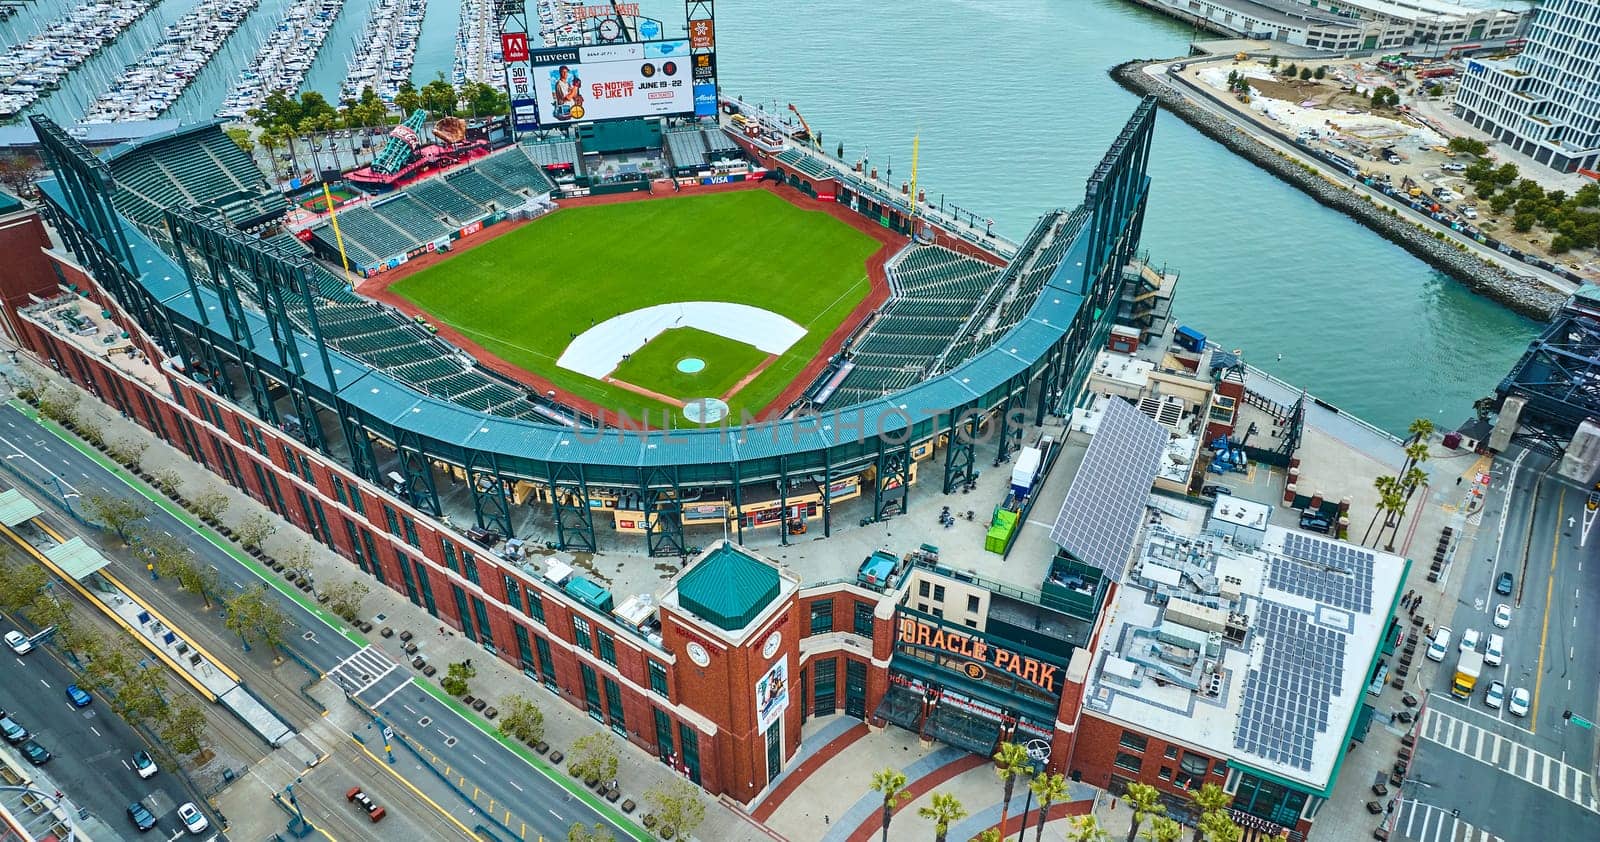 Image of Oracle Park downward aerial of Willie Mays Gate entrance with people on field